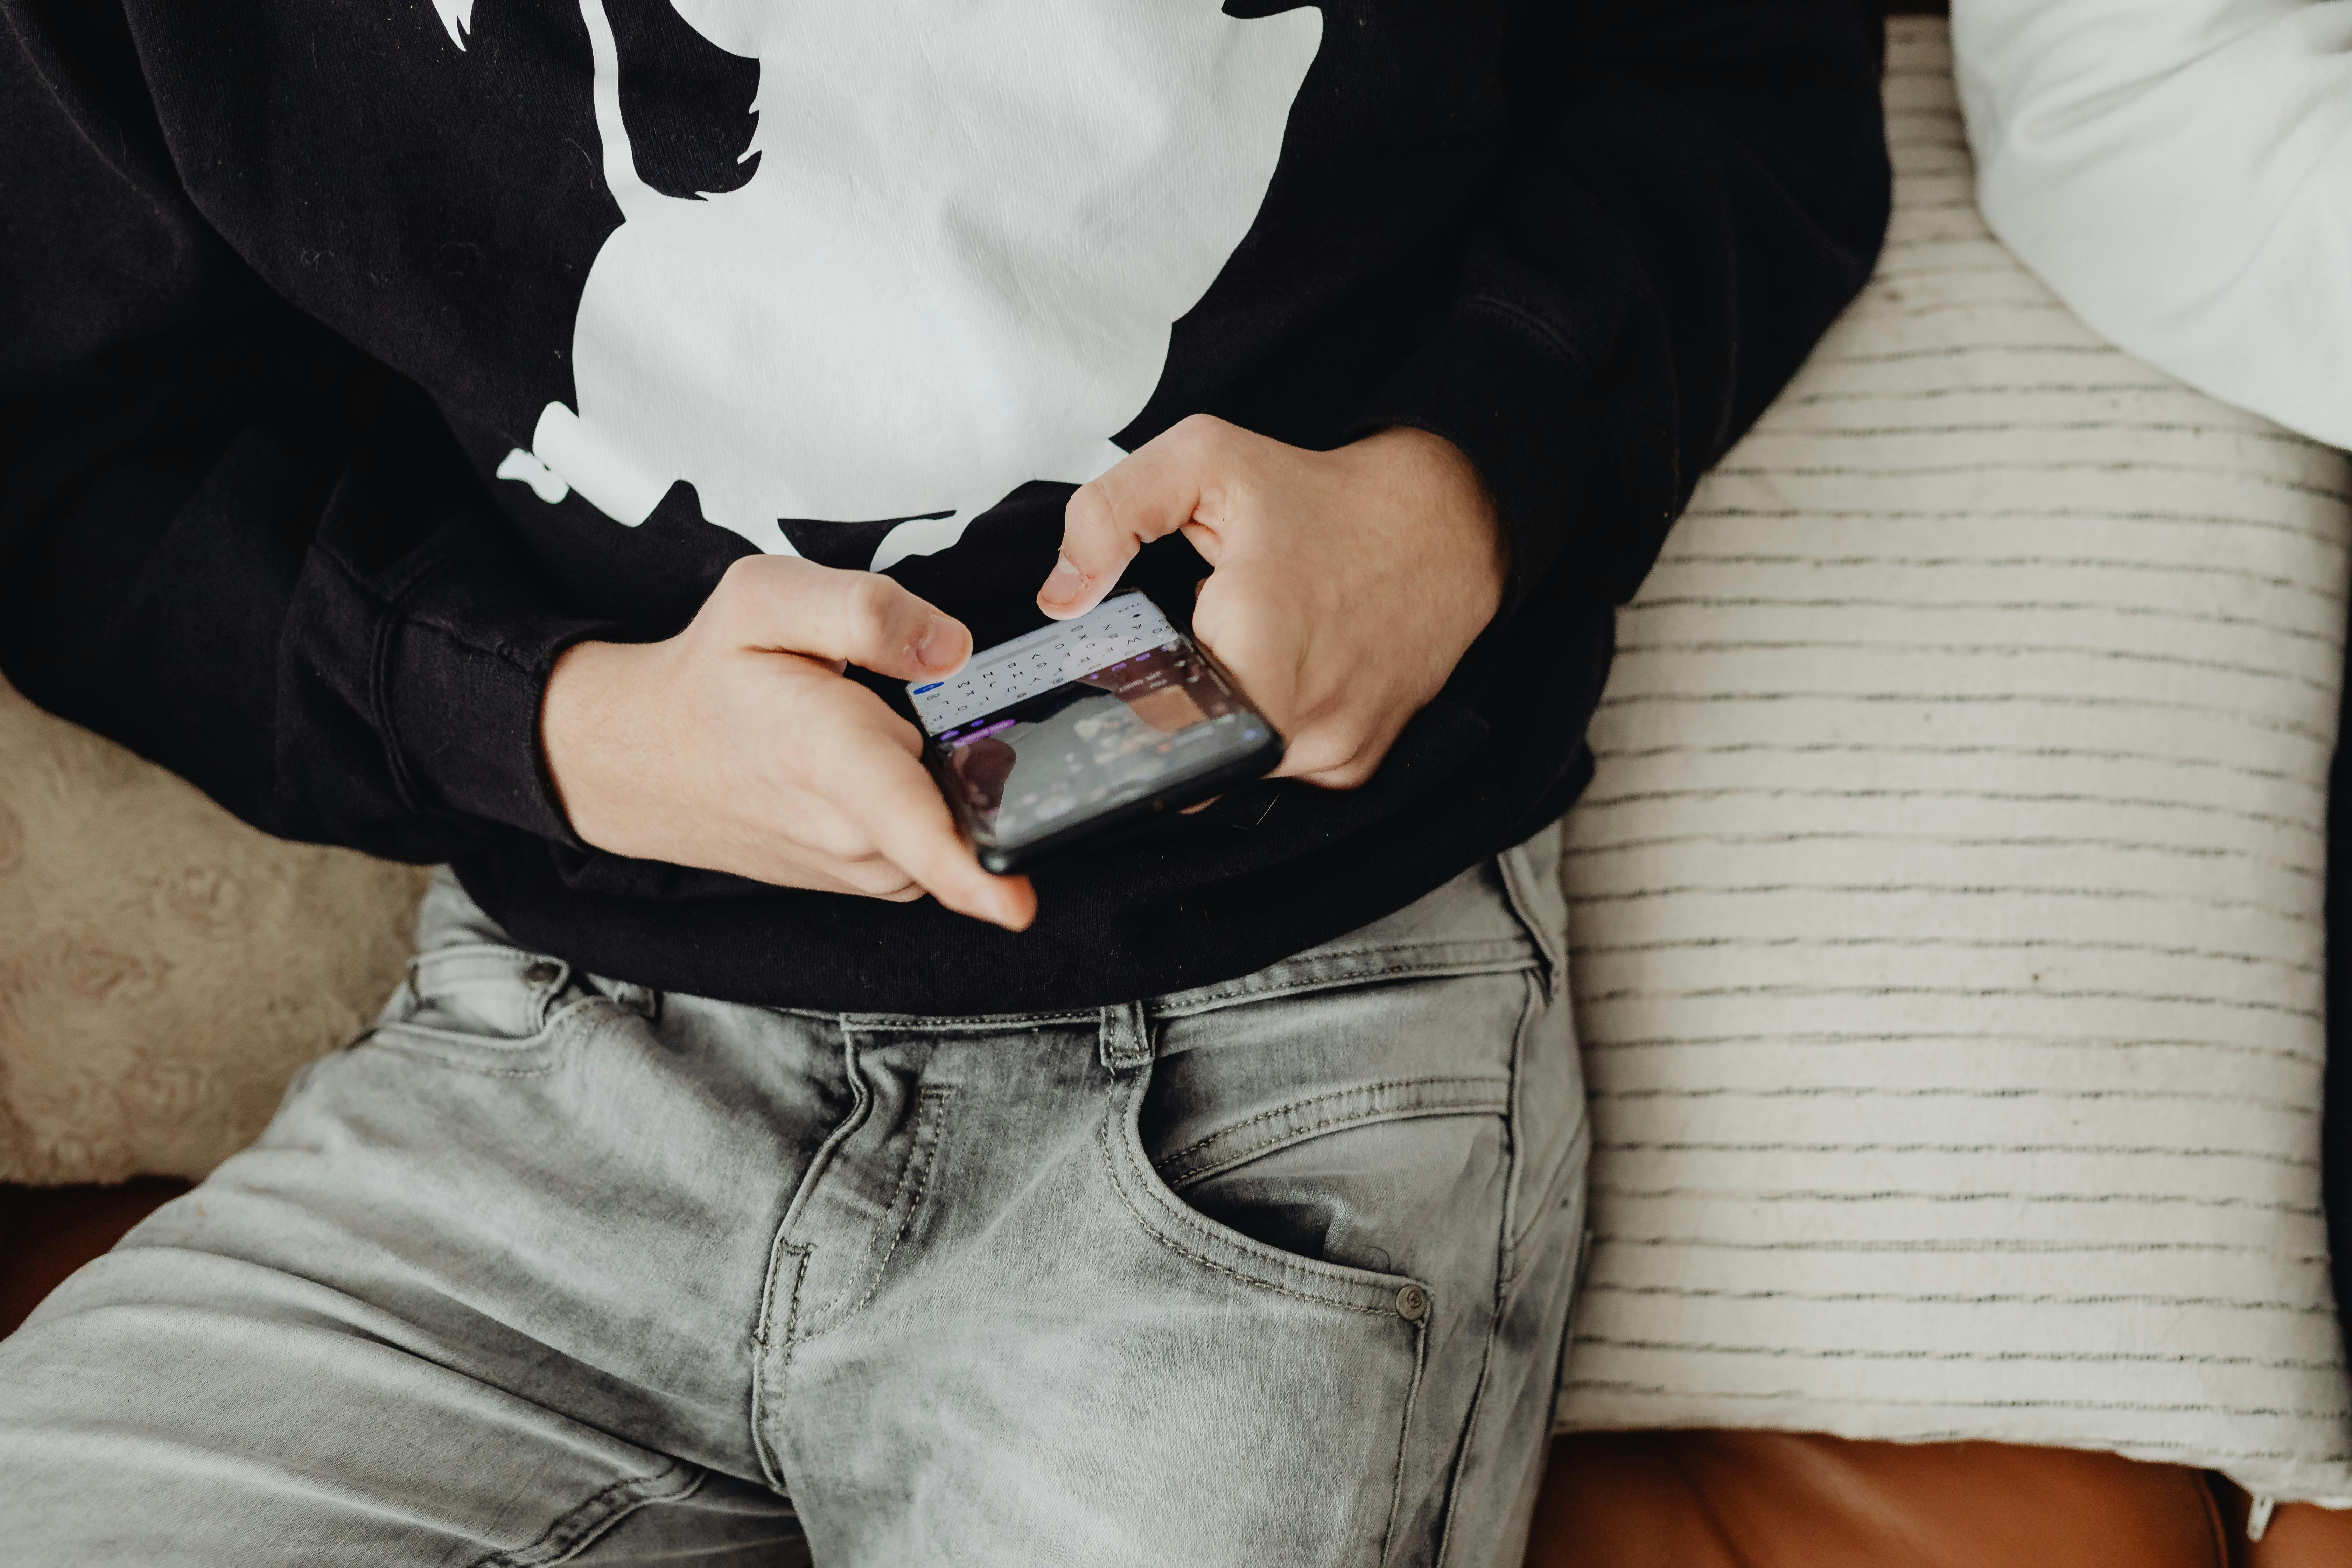 A boy using his phone while seated | Source: Pexels